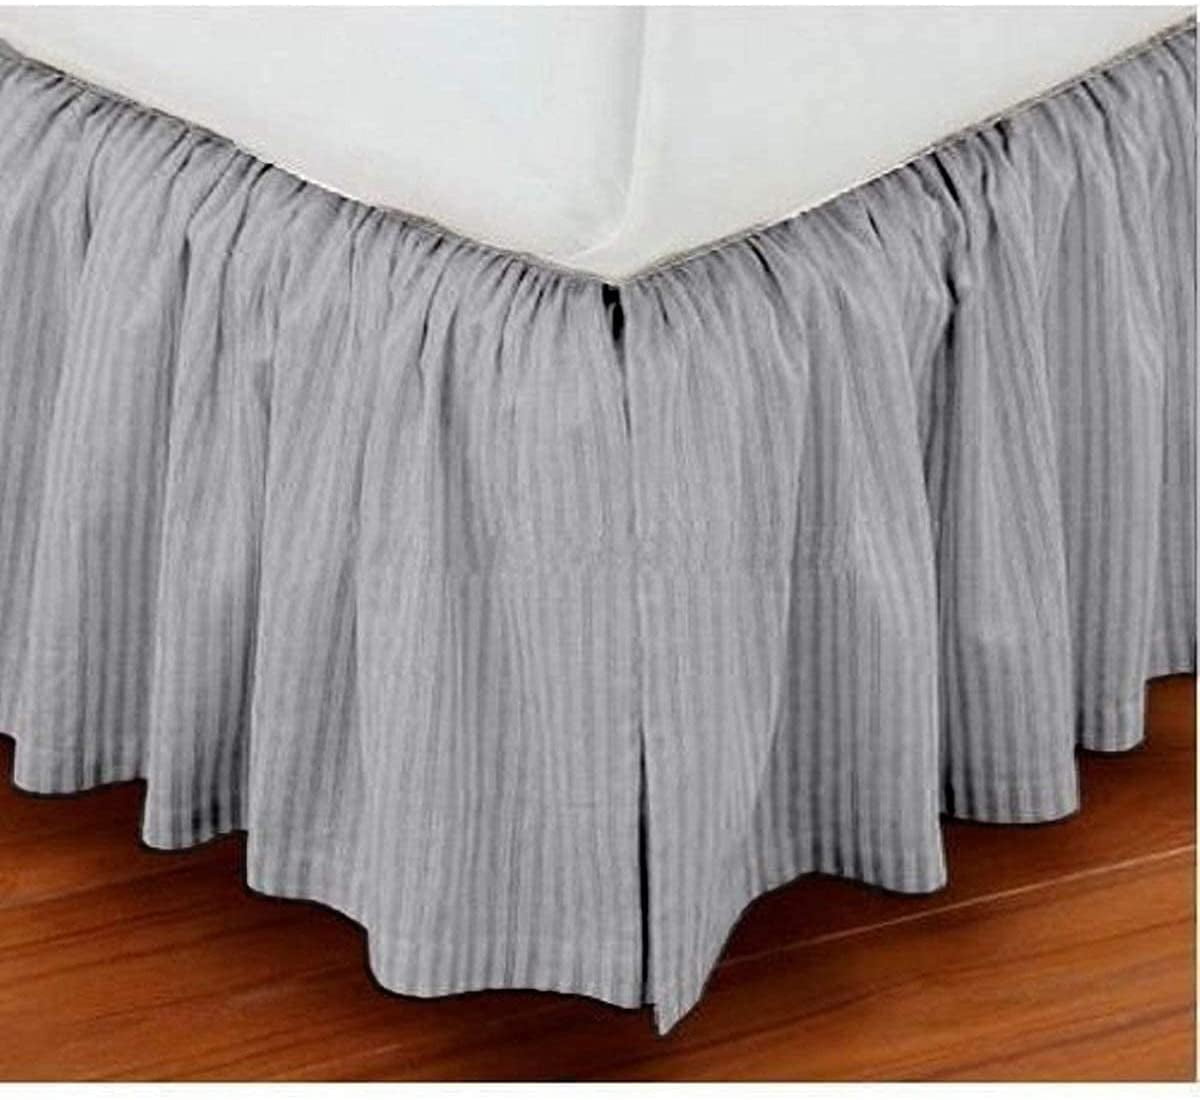 15" Drop White Bed Skirt Dust Ruffle Hotel Quality Pleated Skirt Available 4Size 